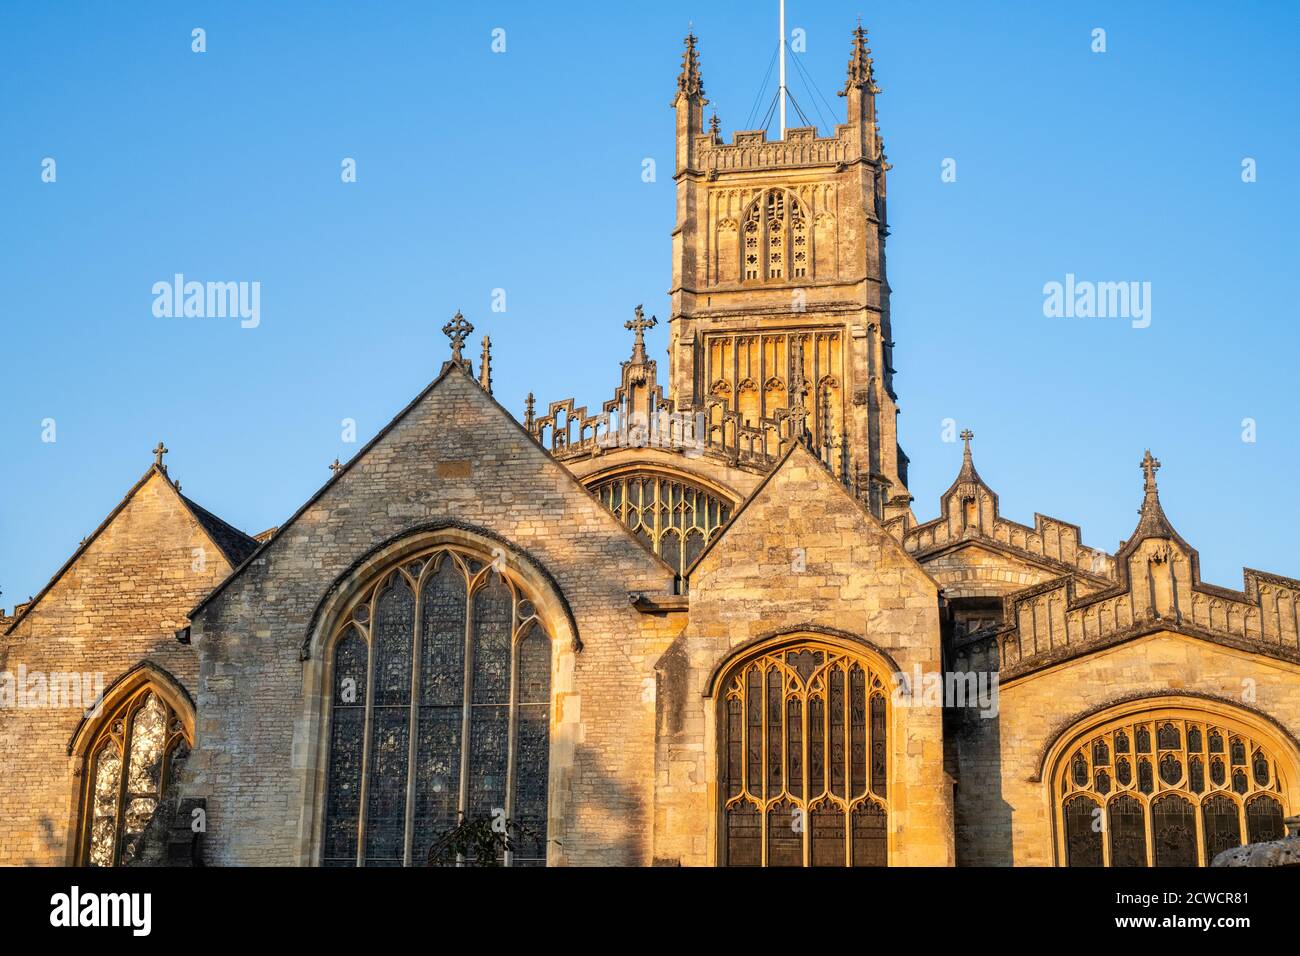 The Church of St. John the Baptist from the garden of rememberance at sunrise in autumn. Cirencester, Cotswolds, Gloucestershire, England Stock Photo